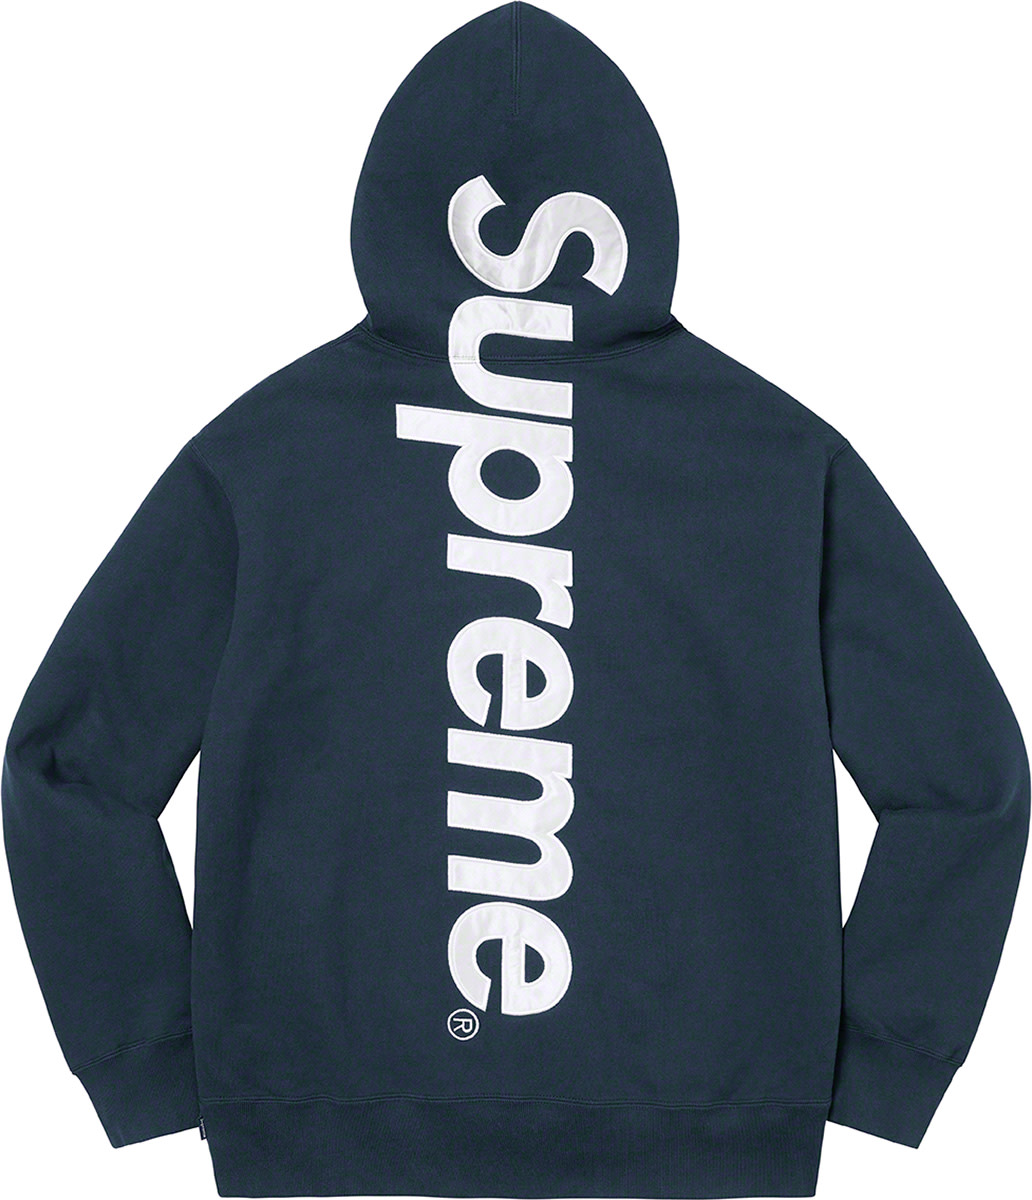 Supreme Satin Applique Hooded Sweat平置きで約68センチです